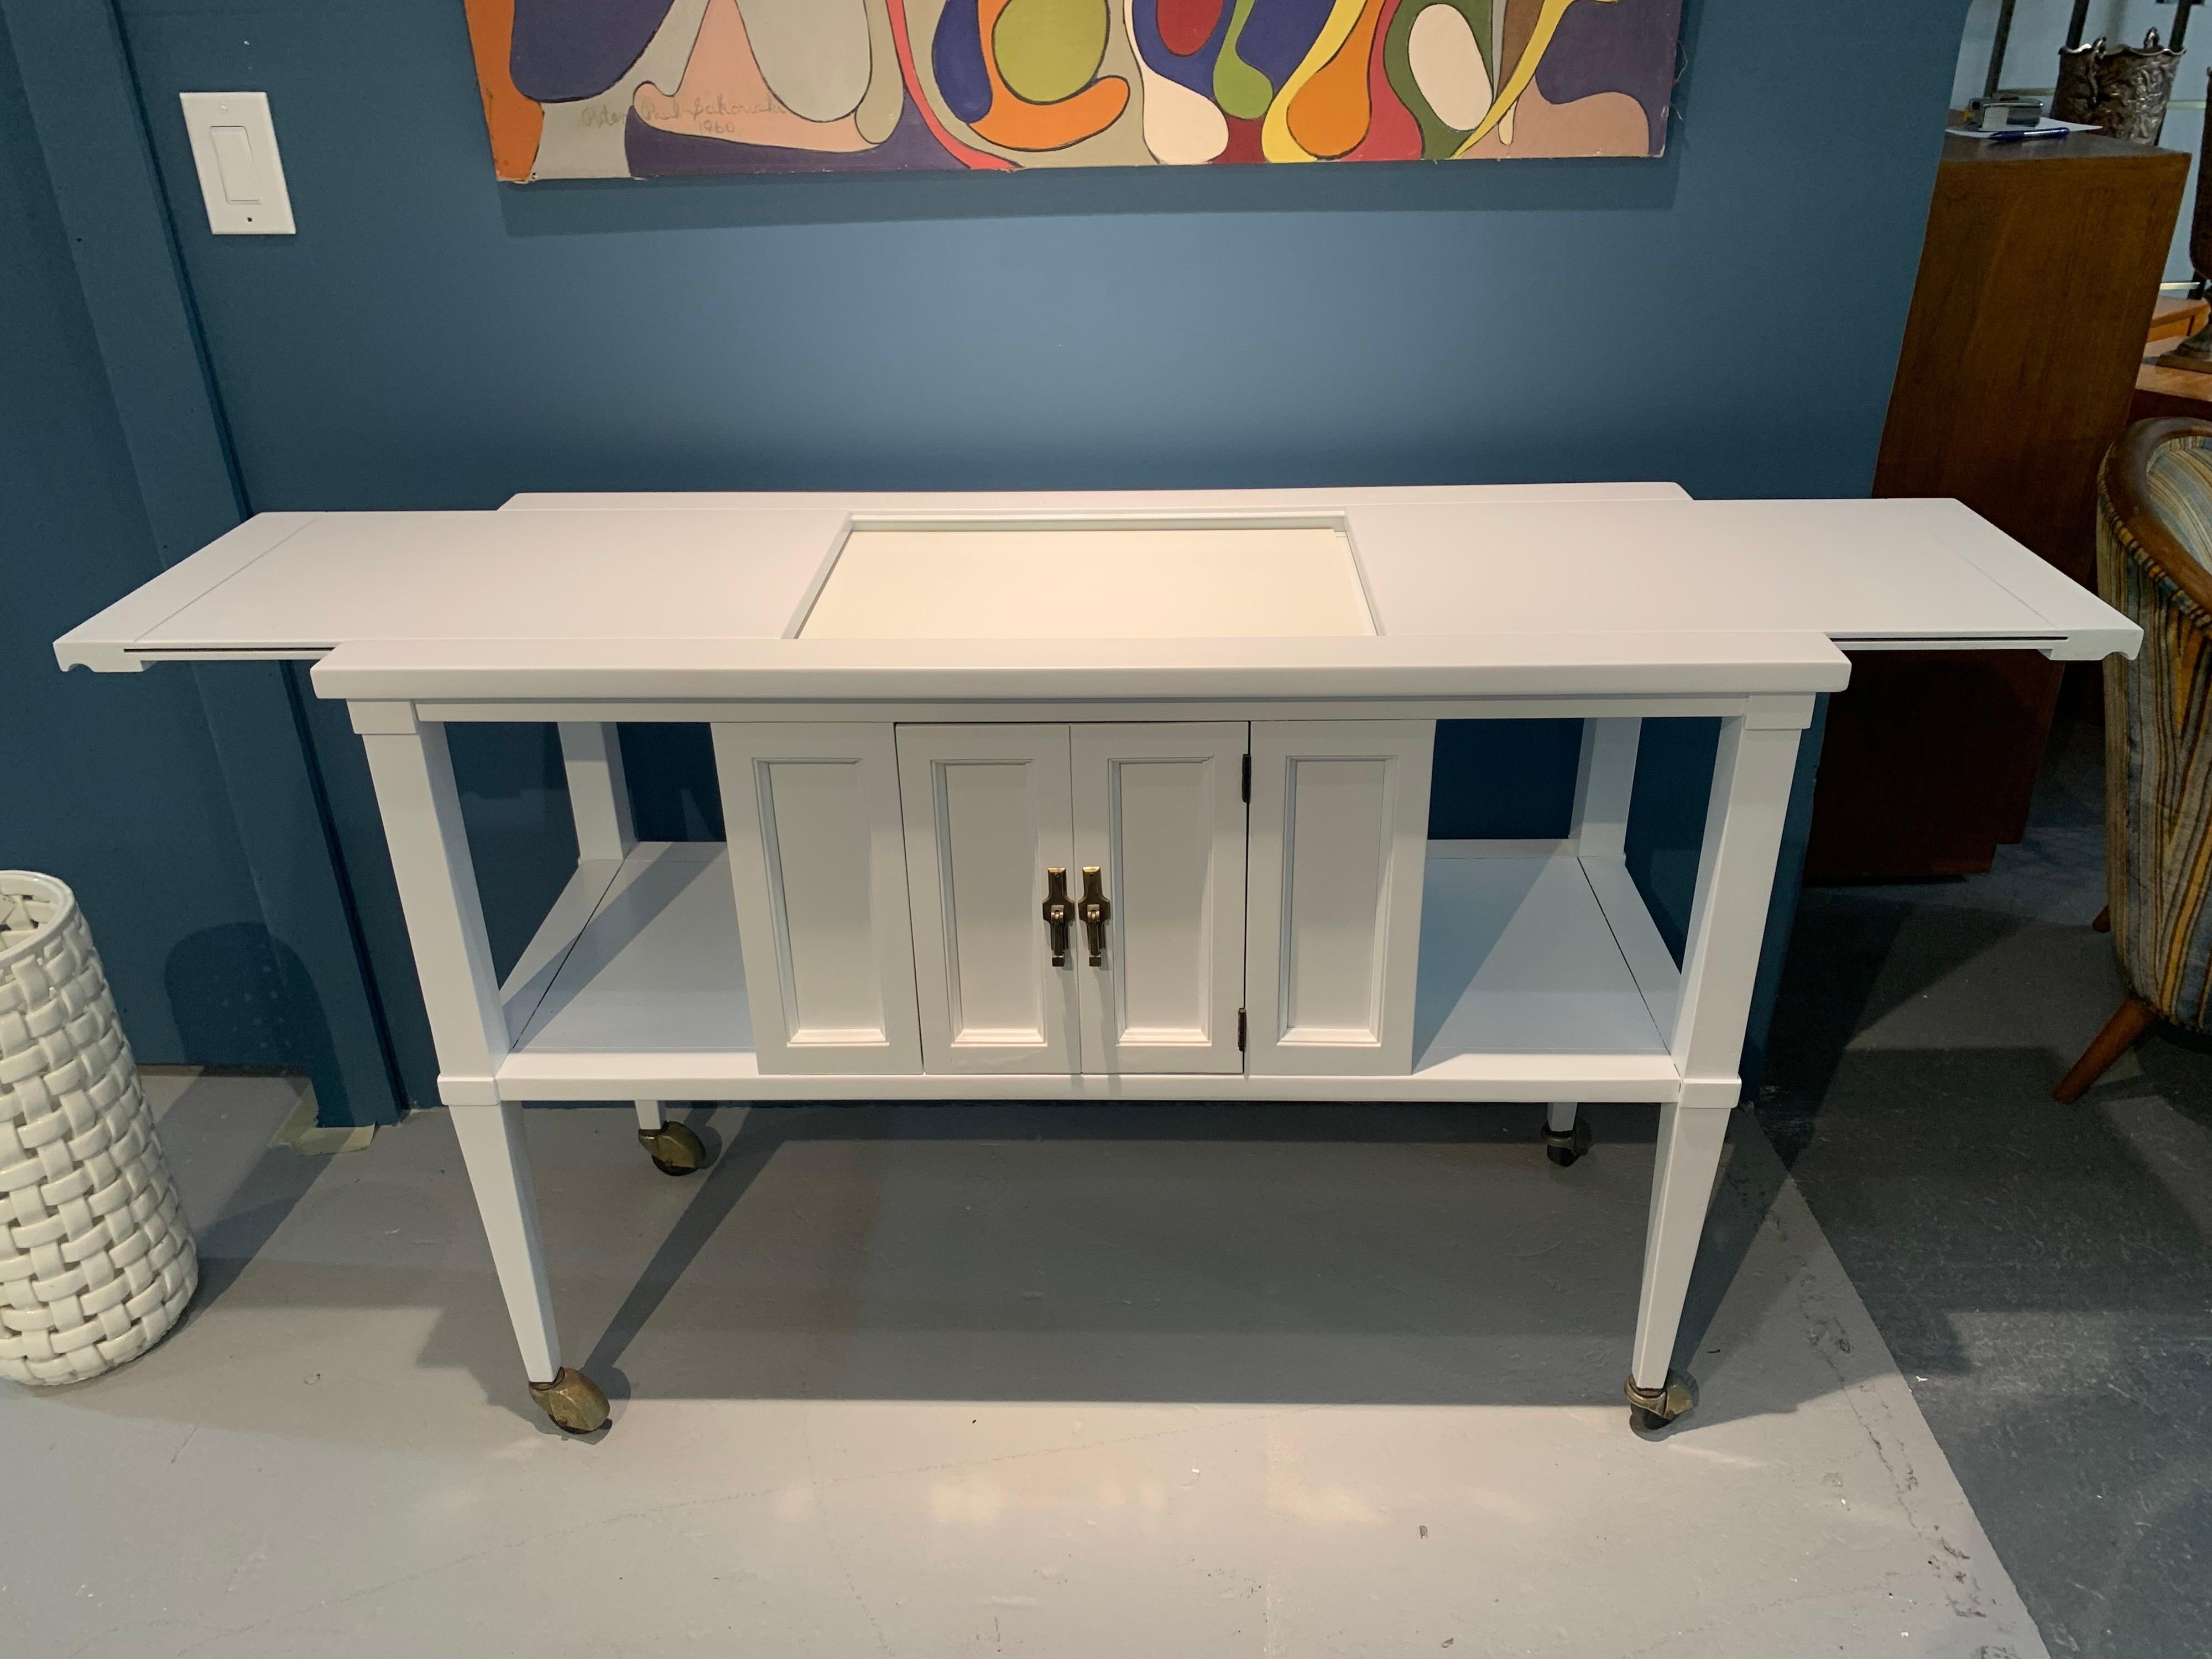 Mid century rolling bar cart buffet has been recently lacquered with a clean white finish. It has two tiers with center cabinet and pullout sides. Serve food or drinks in style with this bar cart that rolls to where you need it.